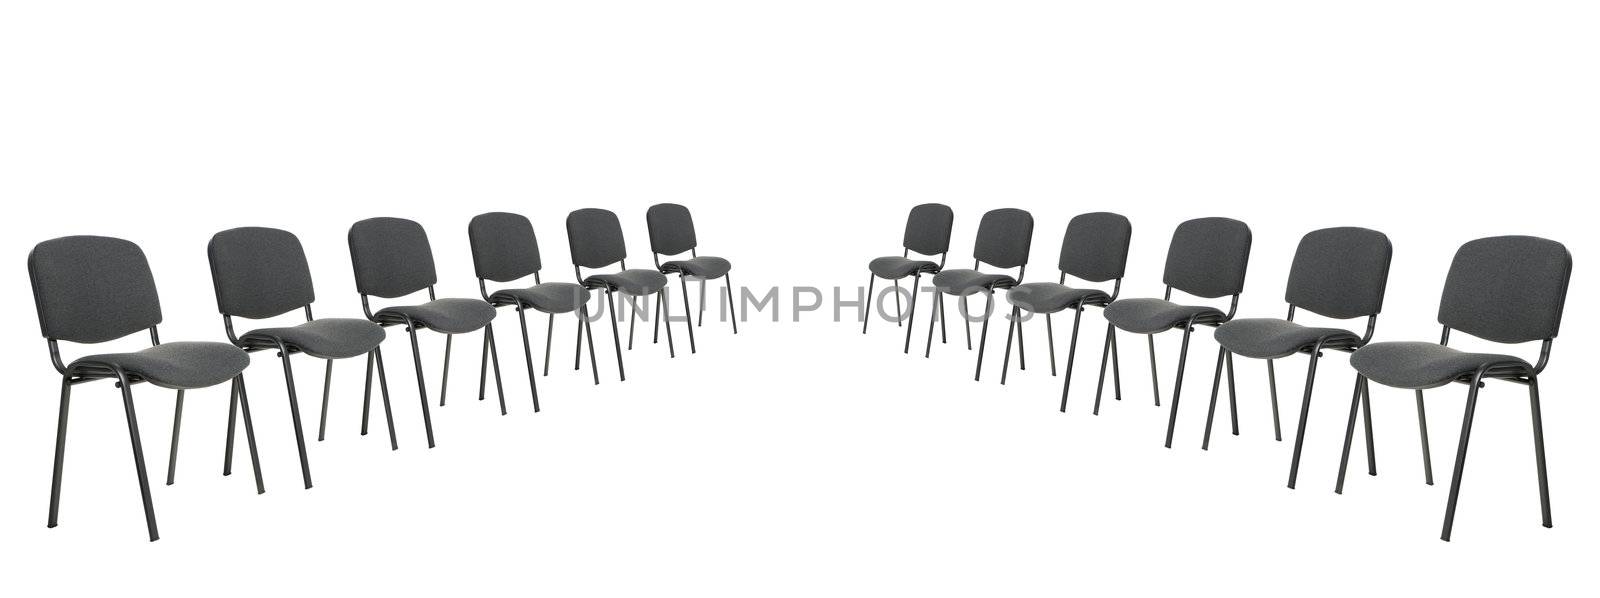 Set of chairs for discussion. It is isolated on a white background